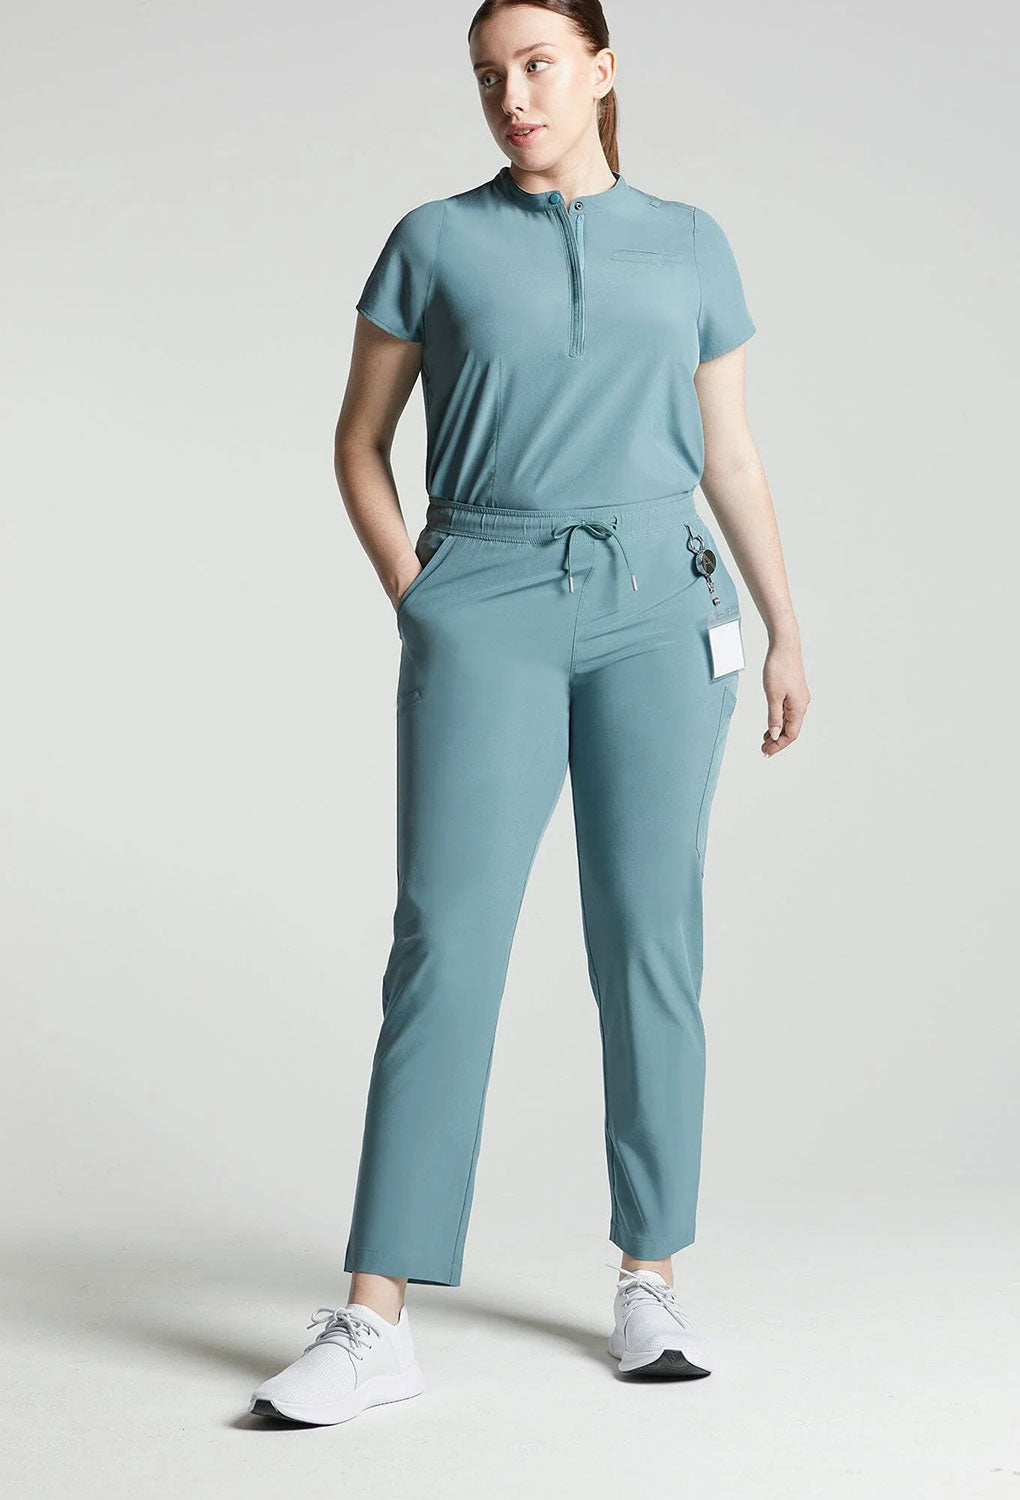 Stretch Quick-Dry Thin Breathable Nursing Scrubs Uniforms Figs Zip